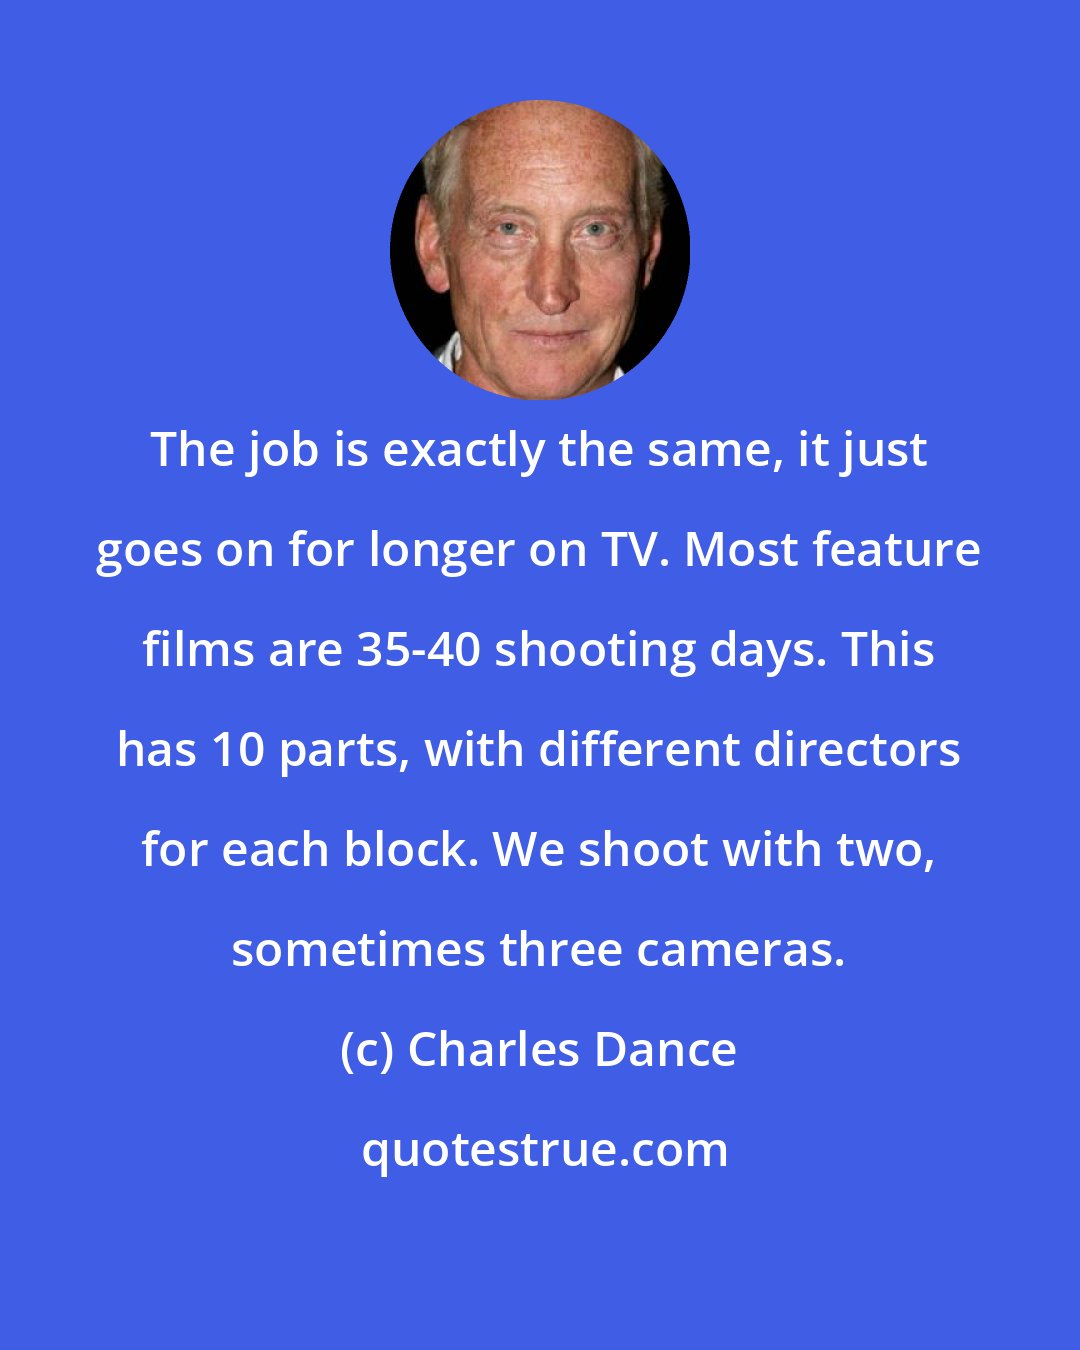 Charles Dance: The job is exactly the same, it just goes on for longer on TV. Most feature films are 35-40 shooting days. This has 10 parts, with different directors for each block. We shoot with two, sometimes three cameras.